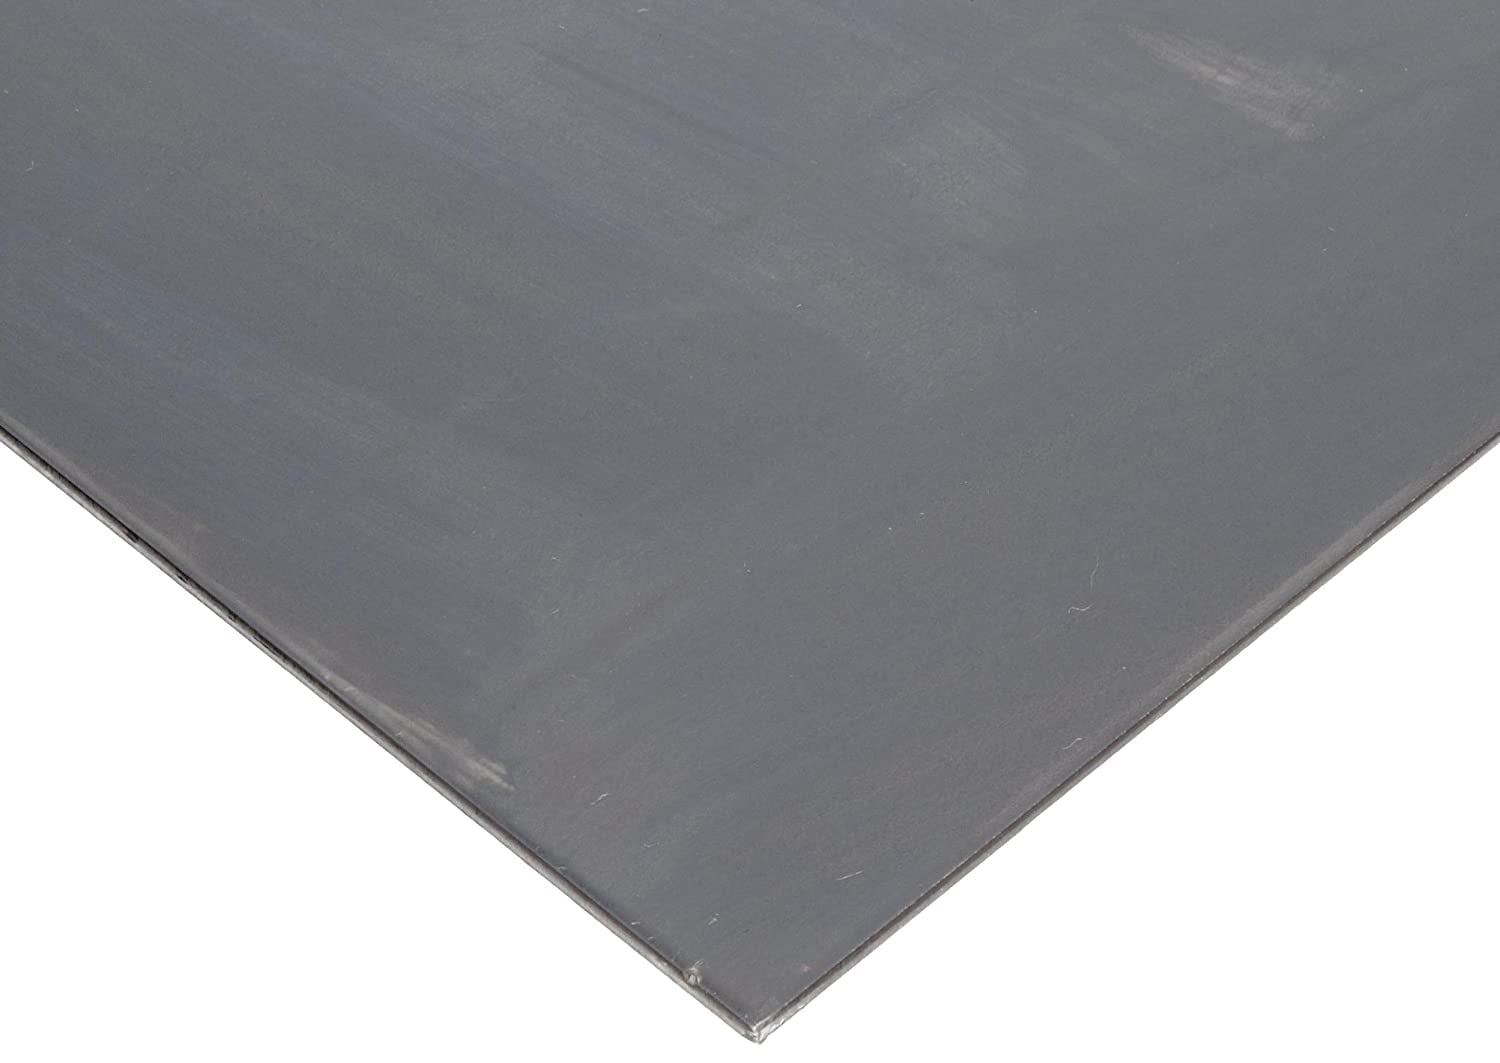 1/8 Thickness ASTM A36 1 Width 24 Length Unpolished A36 Steel Rectangular Bar Finish Mill